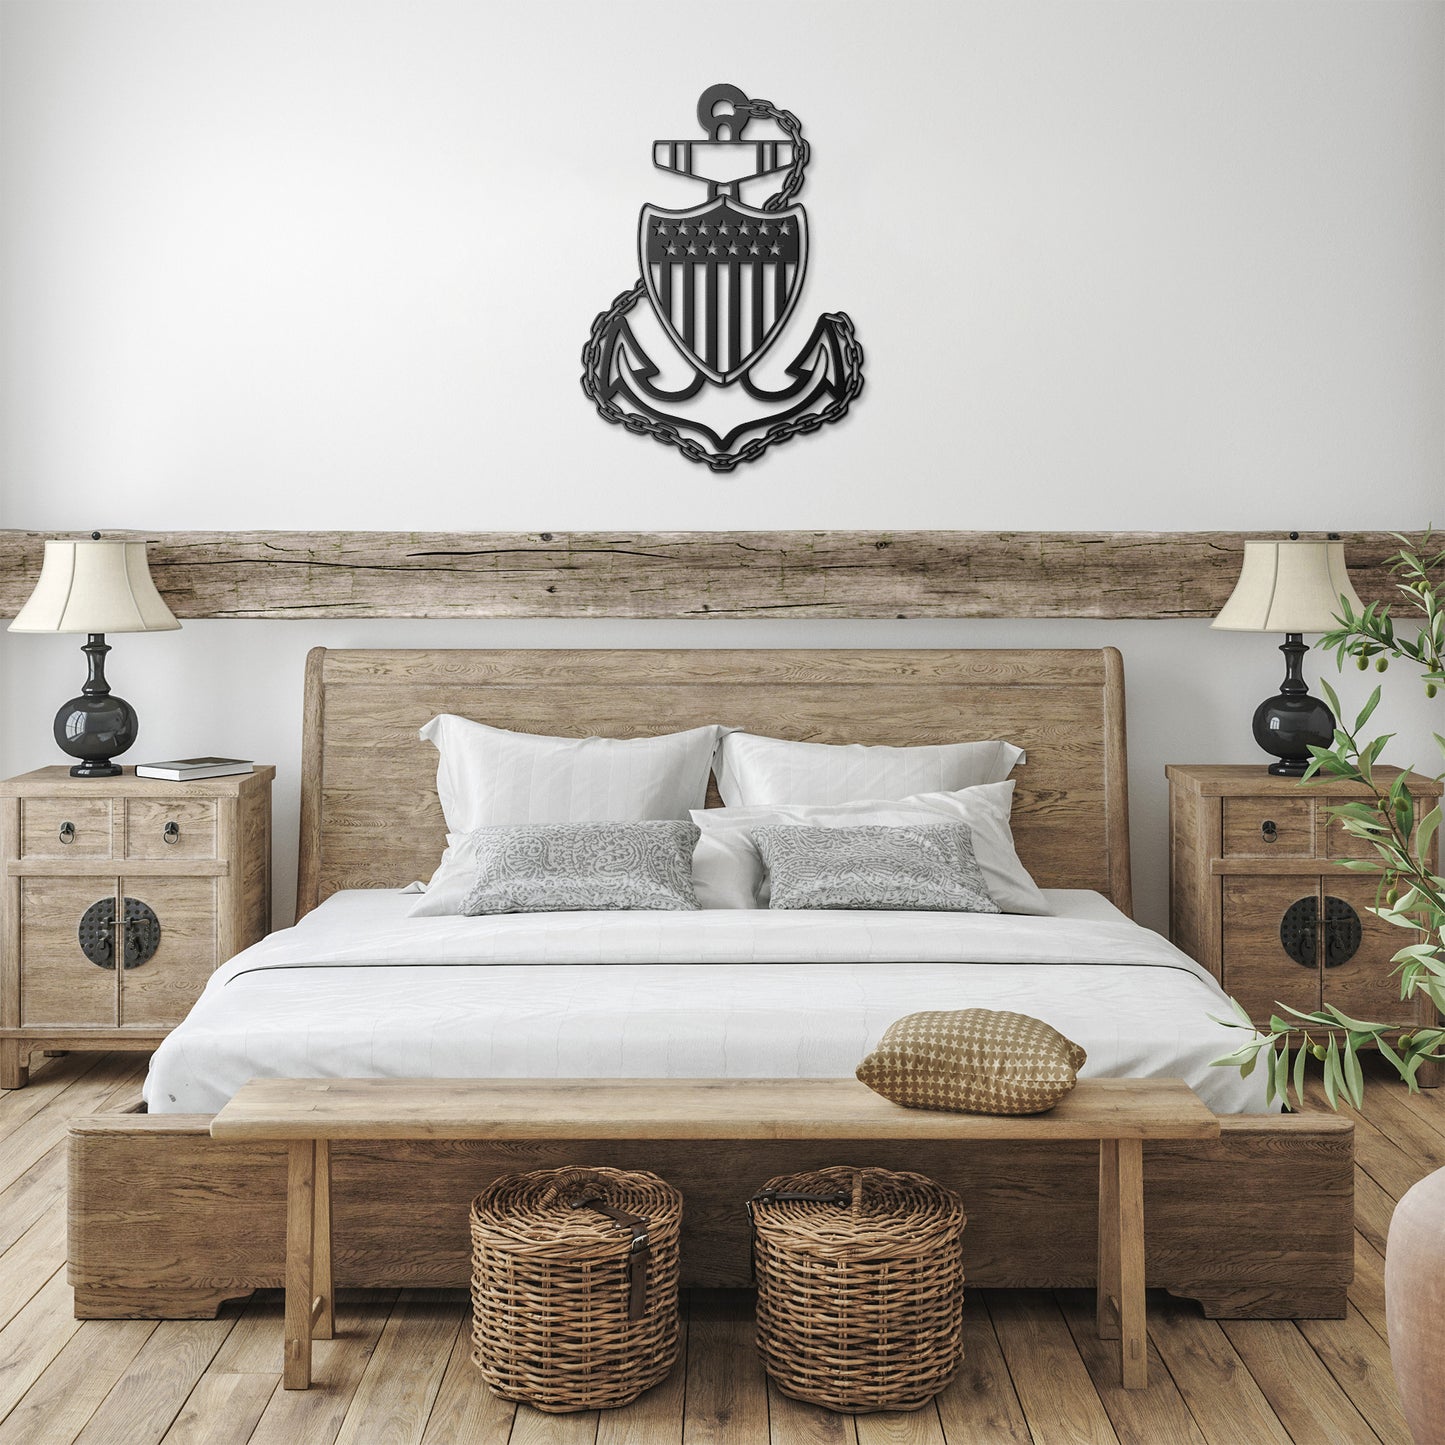 USCG Stability and Security Anchor Symbol Metal Wall Art